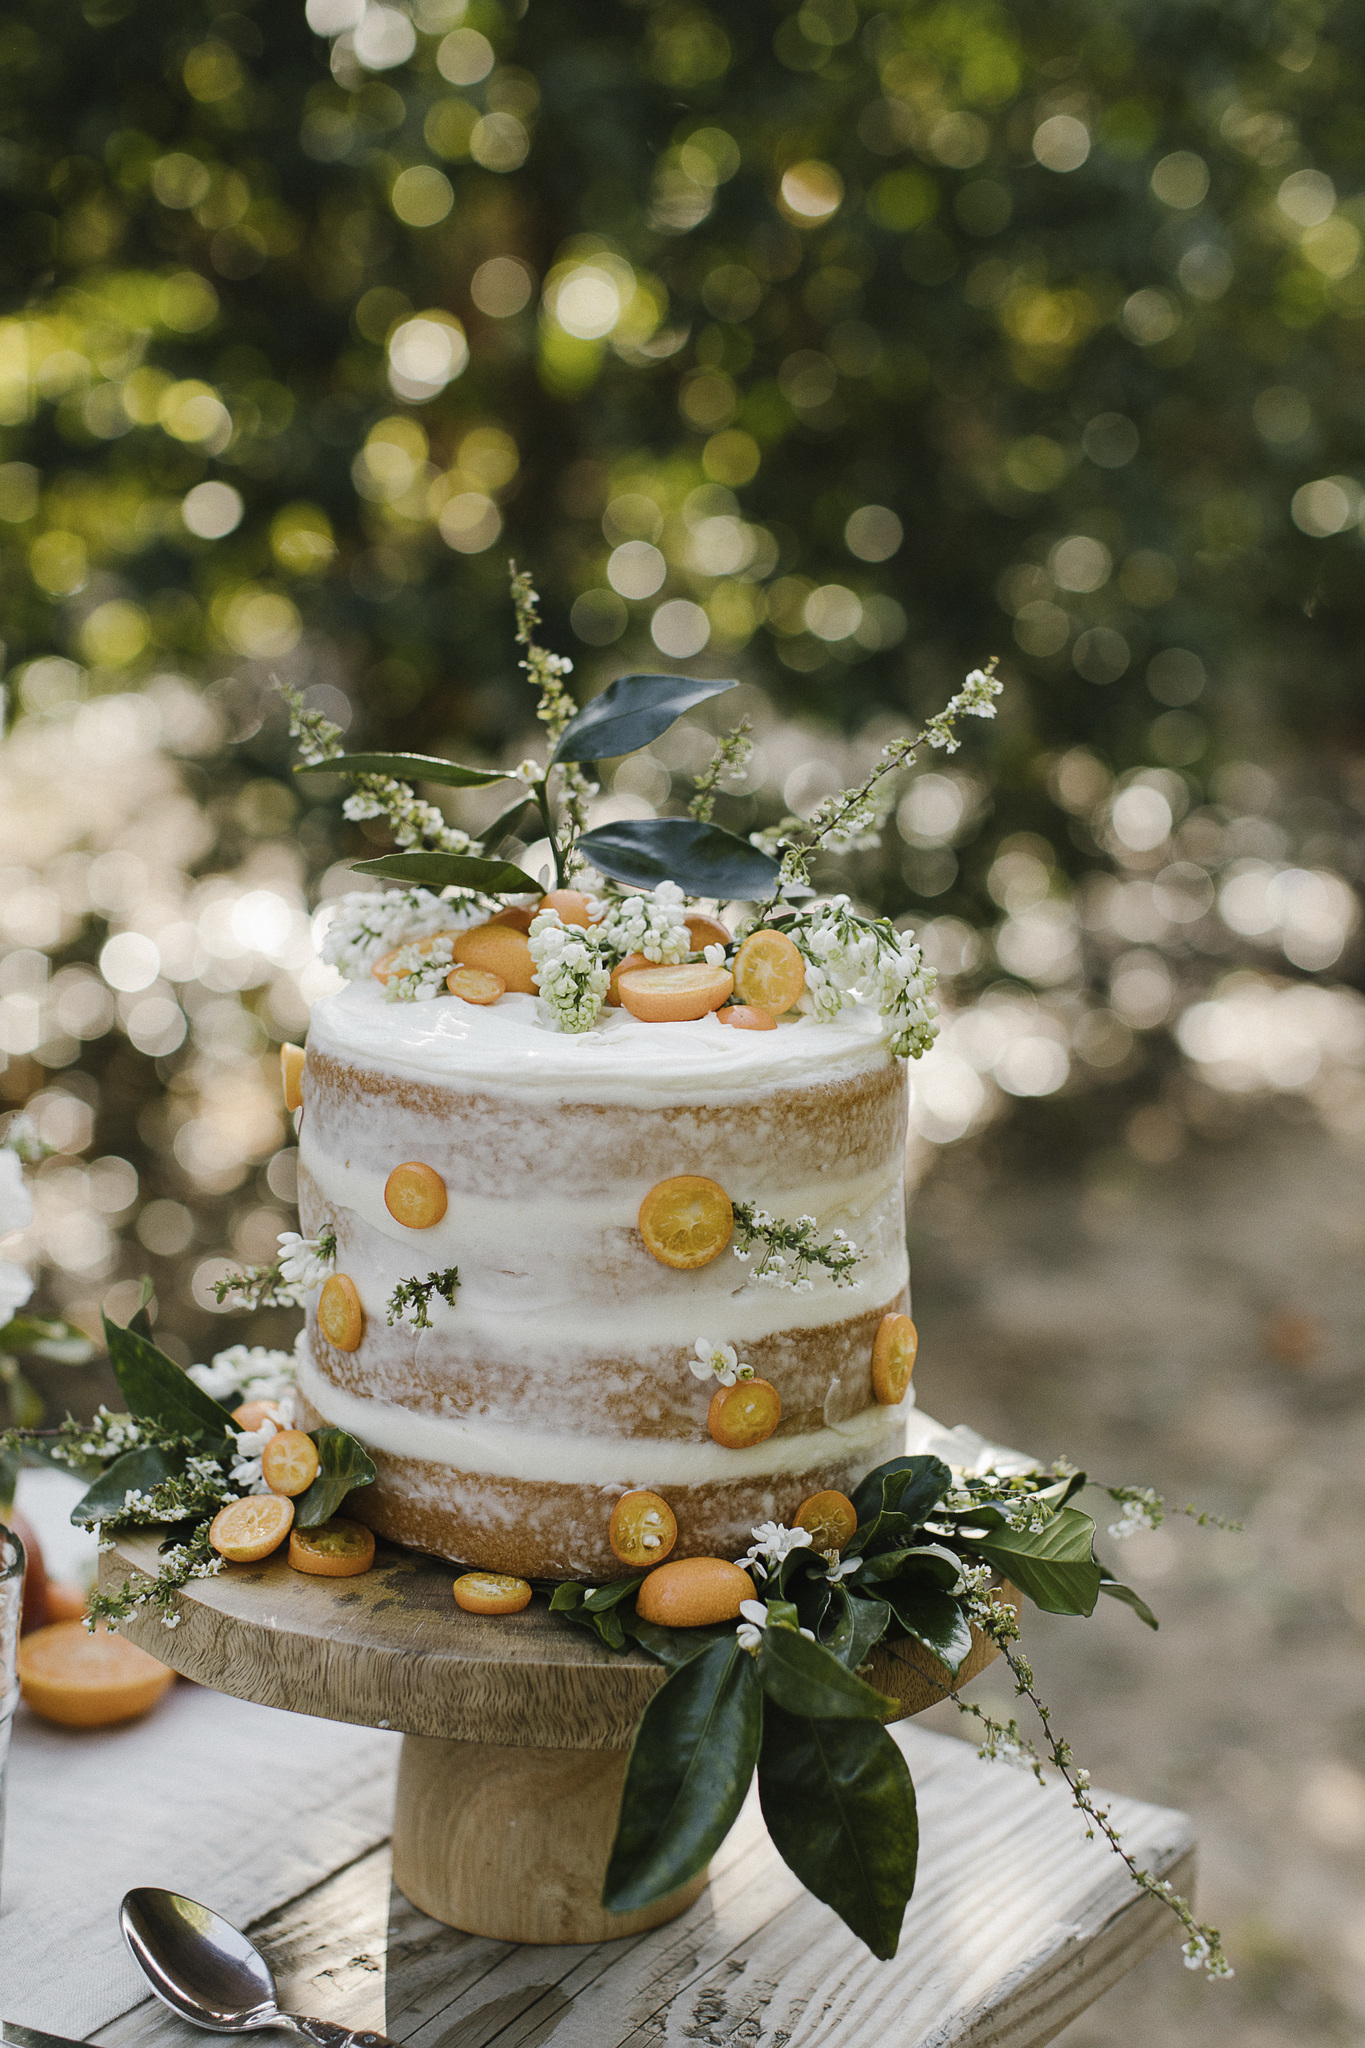 Naked cake with fruit for an outdoor fete with an organic, earthy, laid back feel - Jenni Kayne for PACIFIC NATURAL (Rizzoli, 2019).